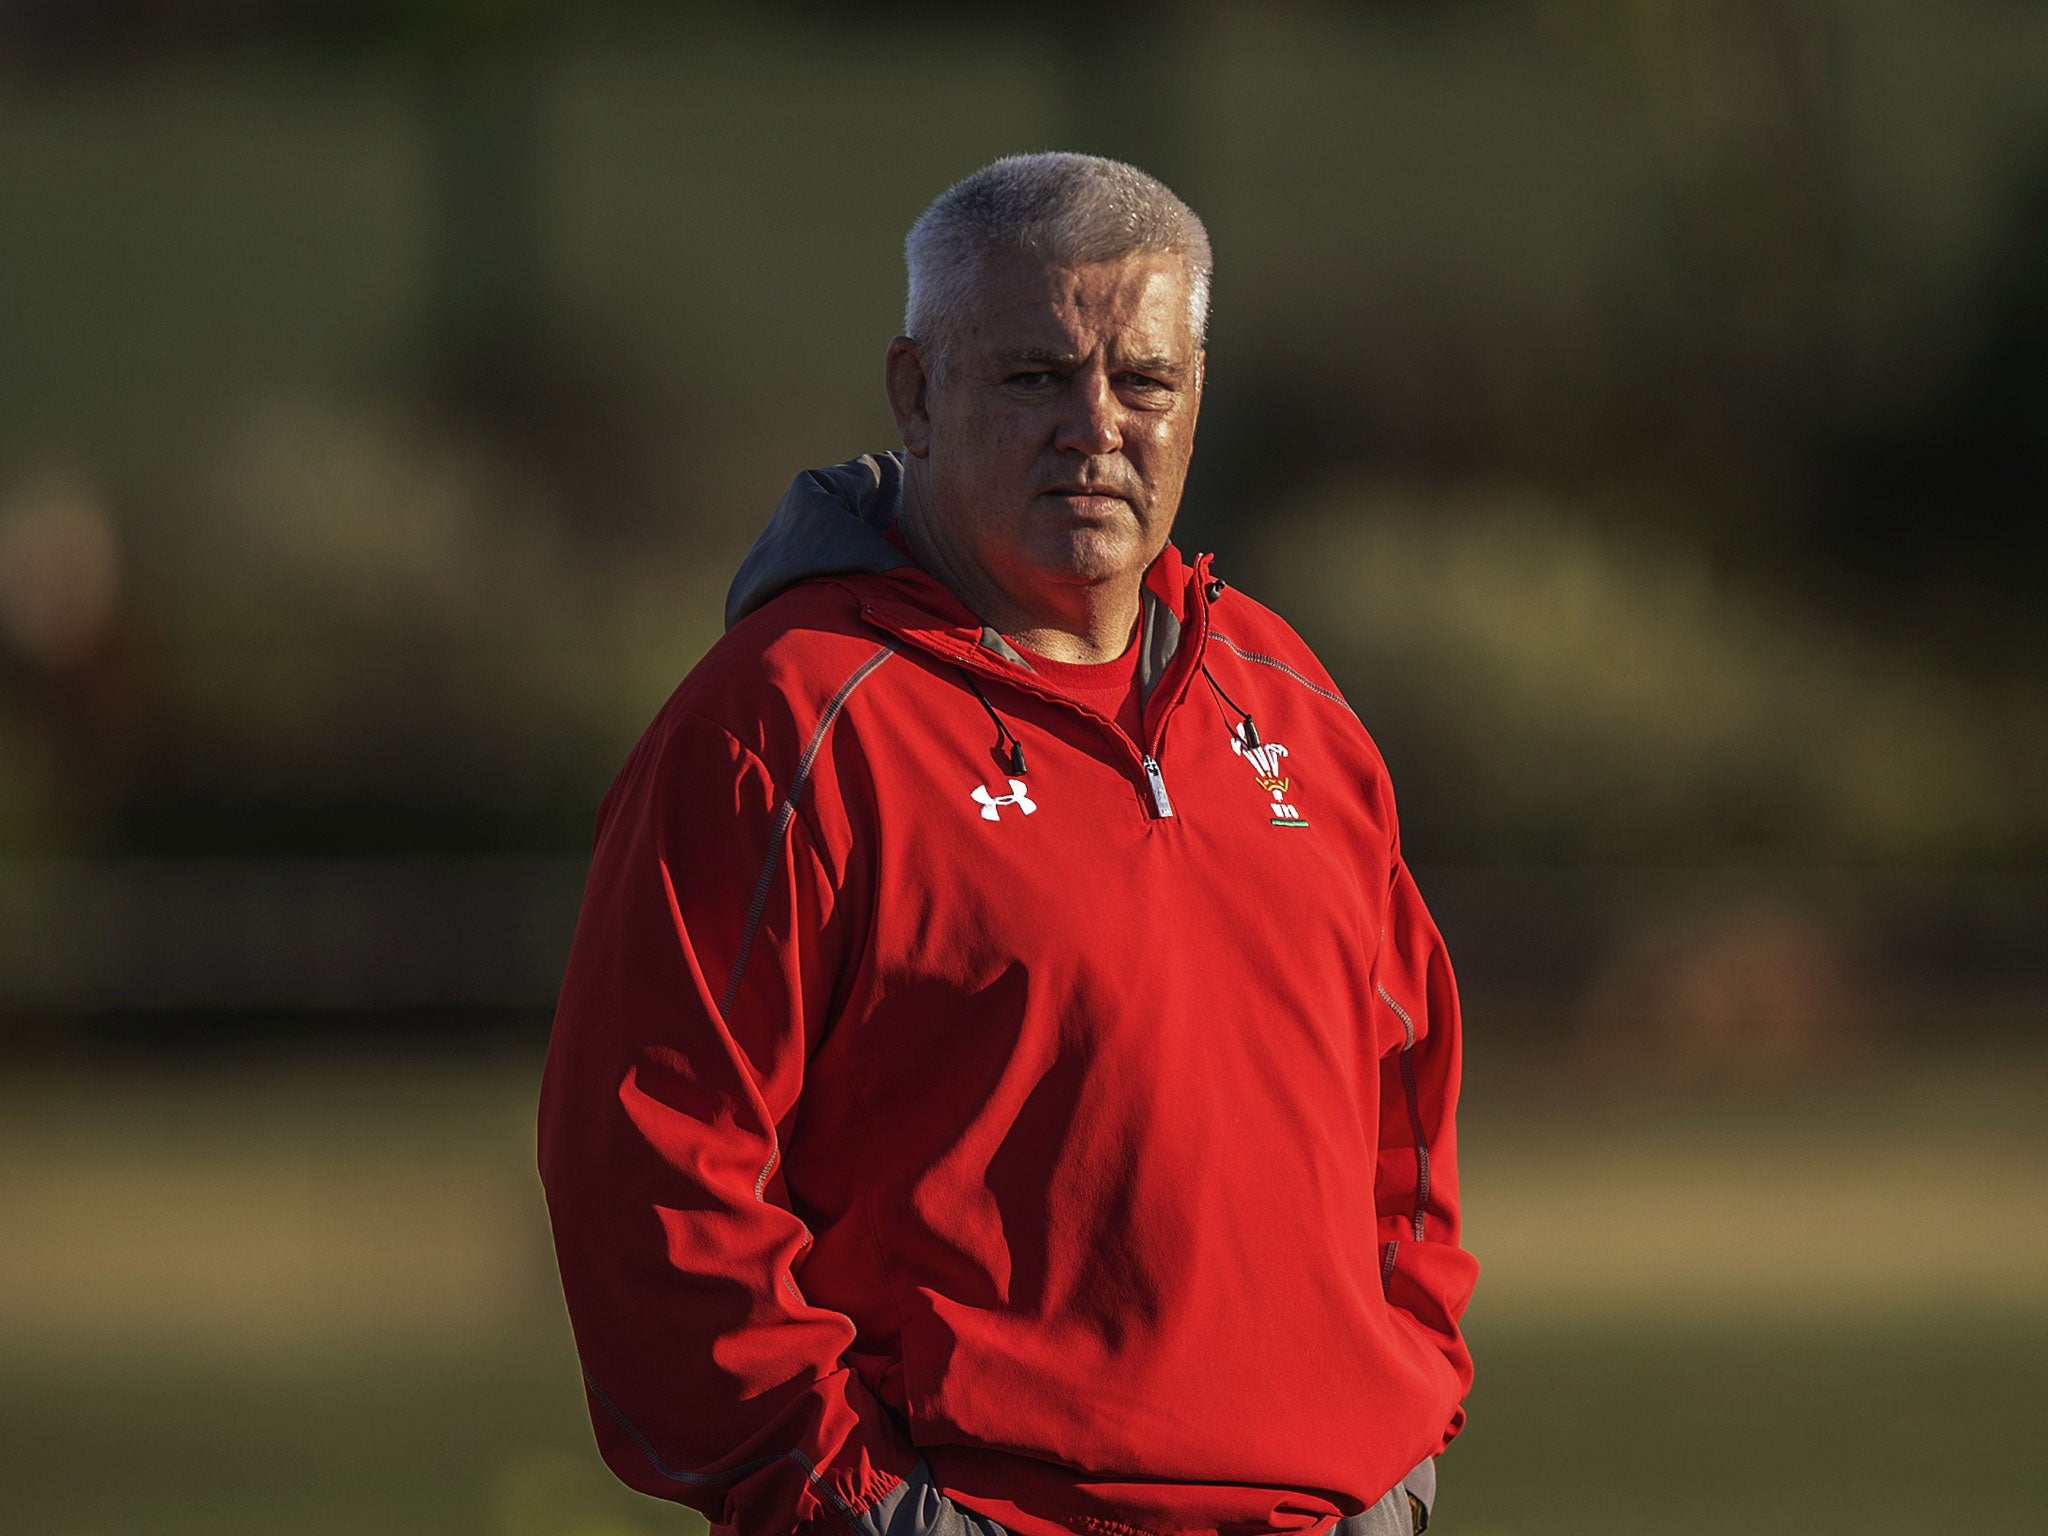 Warren Gatland saw his Wales team suffer an agonisingly late defeat against South Africa